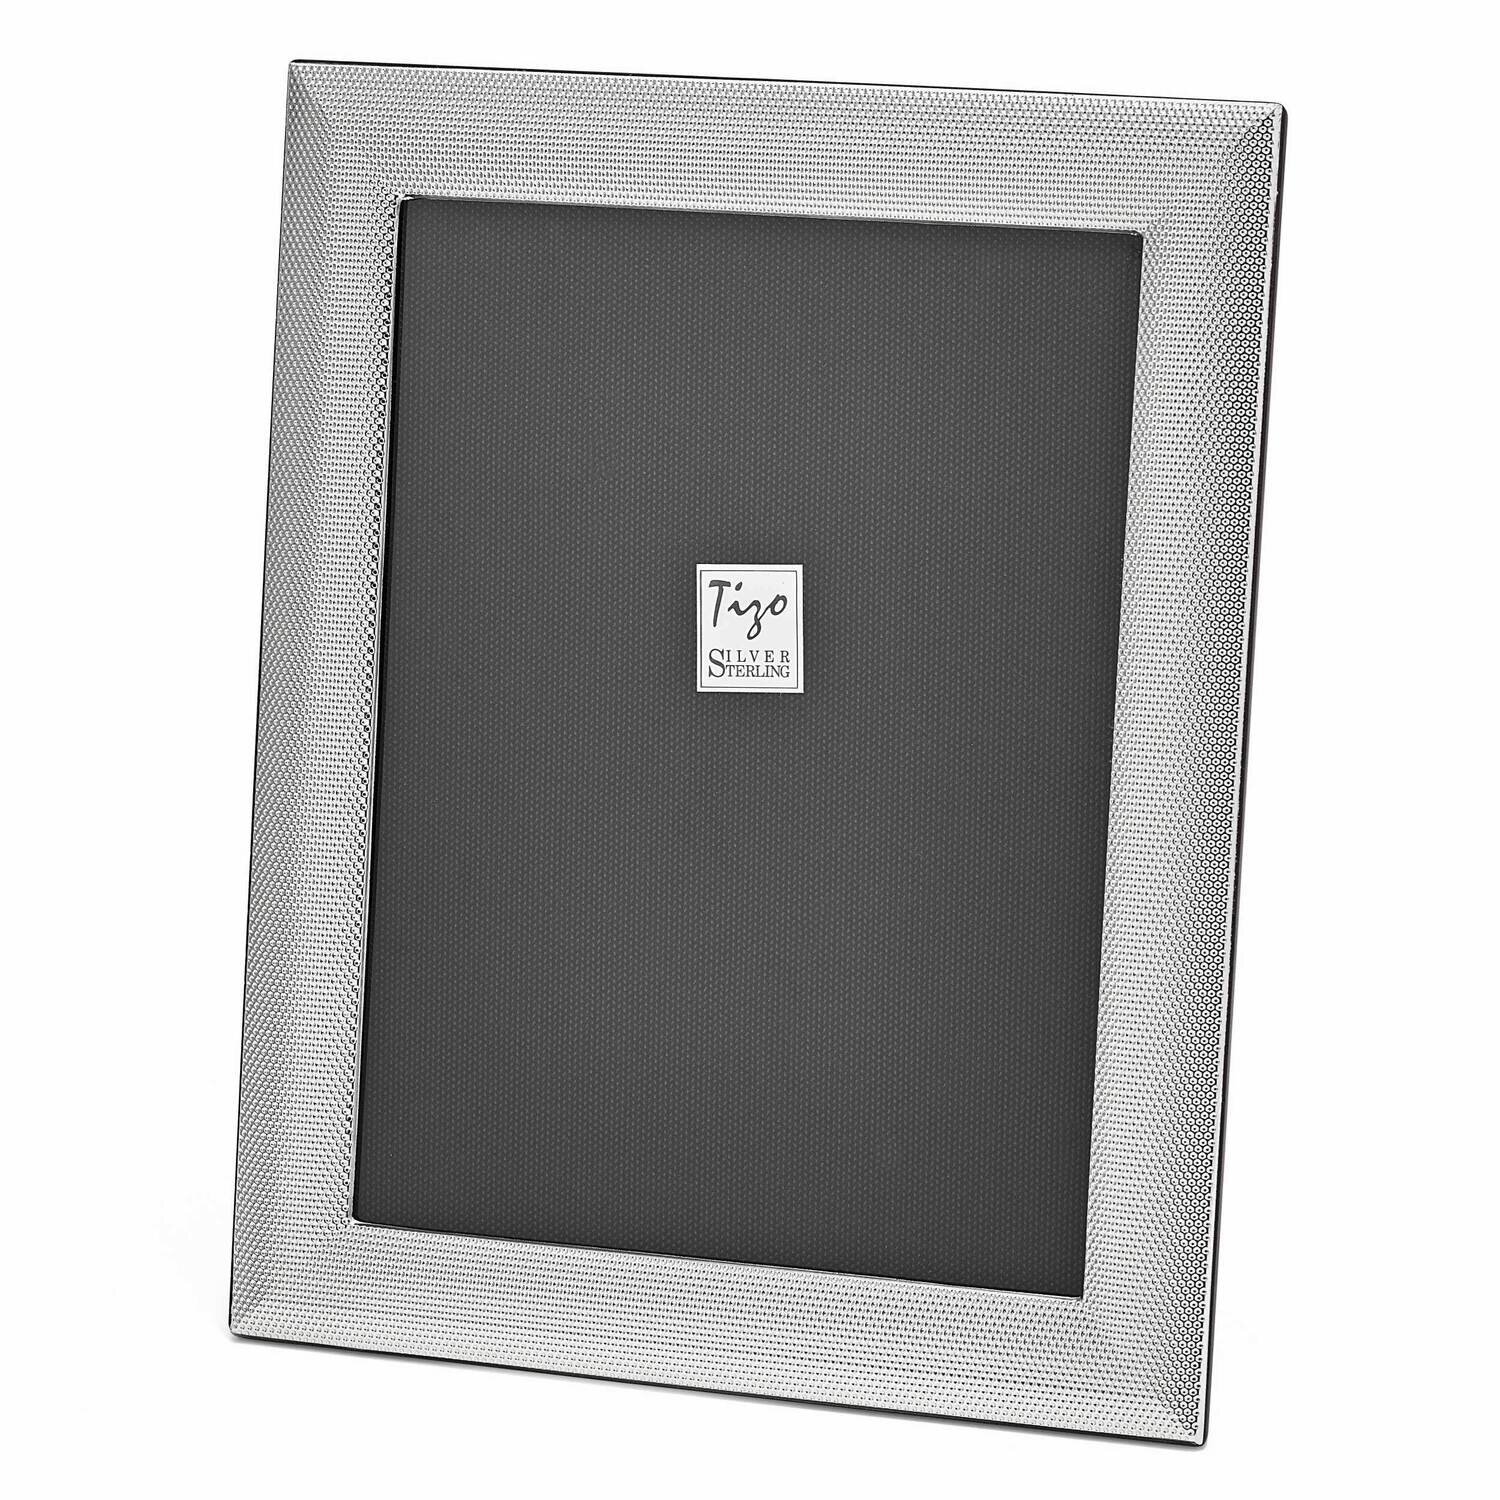 Border Flat Plain 7.5X9.5 Picture Frame Silver-plated GM7034